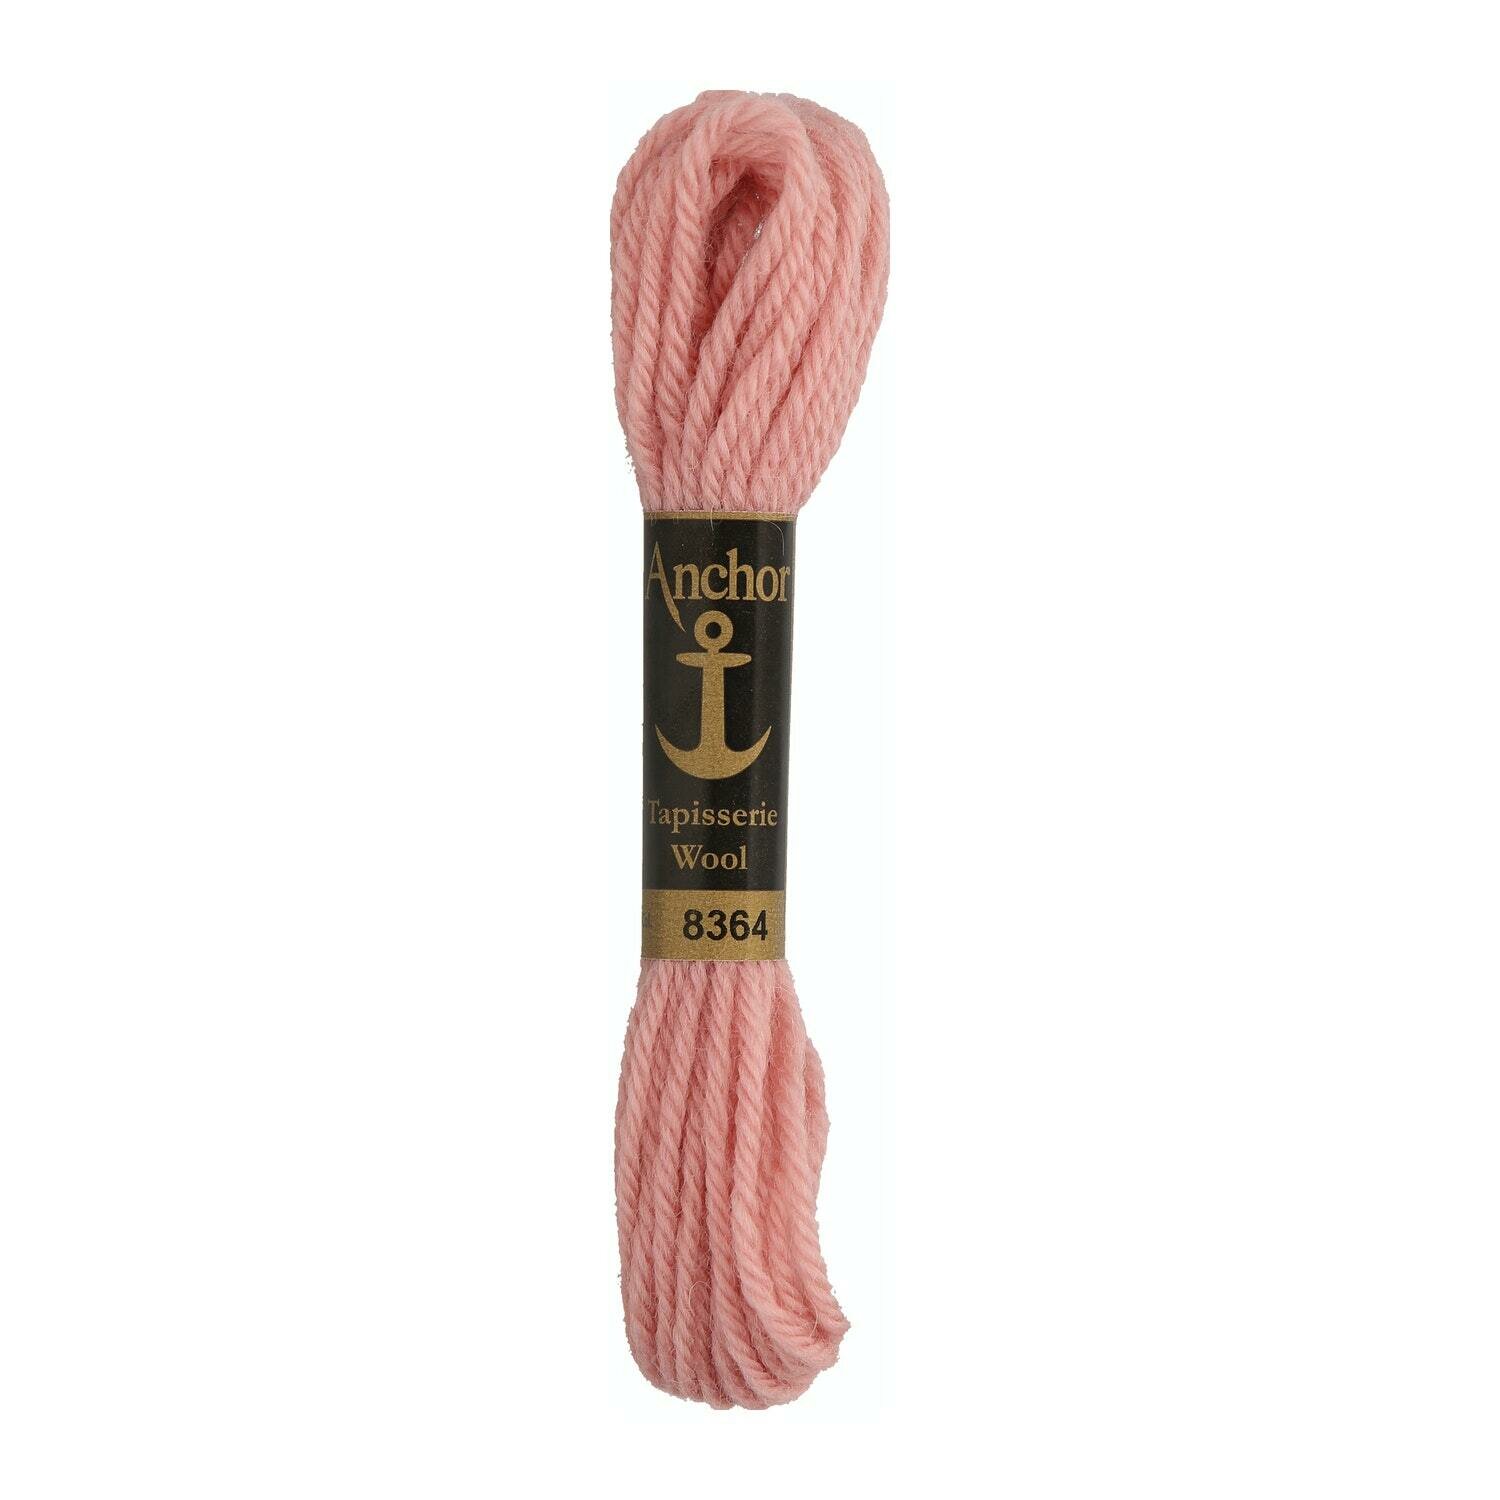 Anchor Tapisserie Wool # 08364